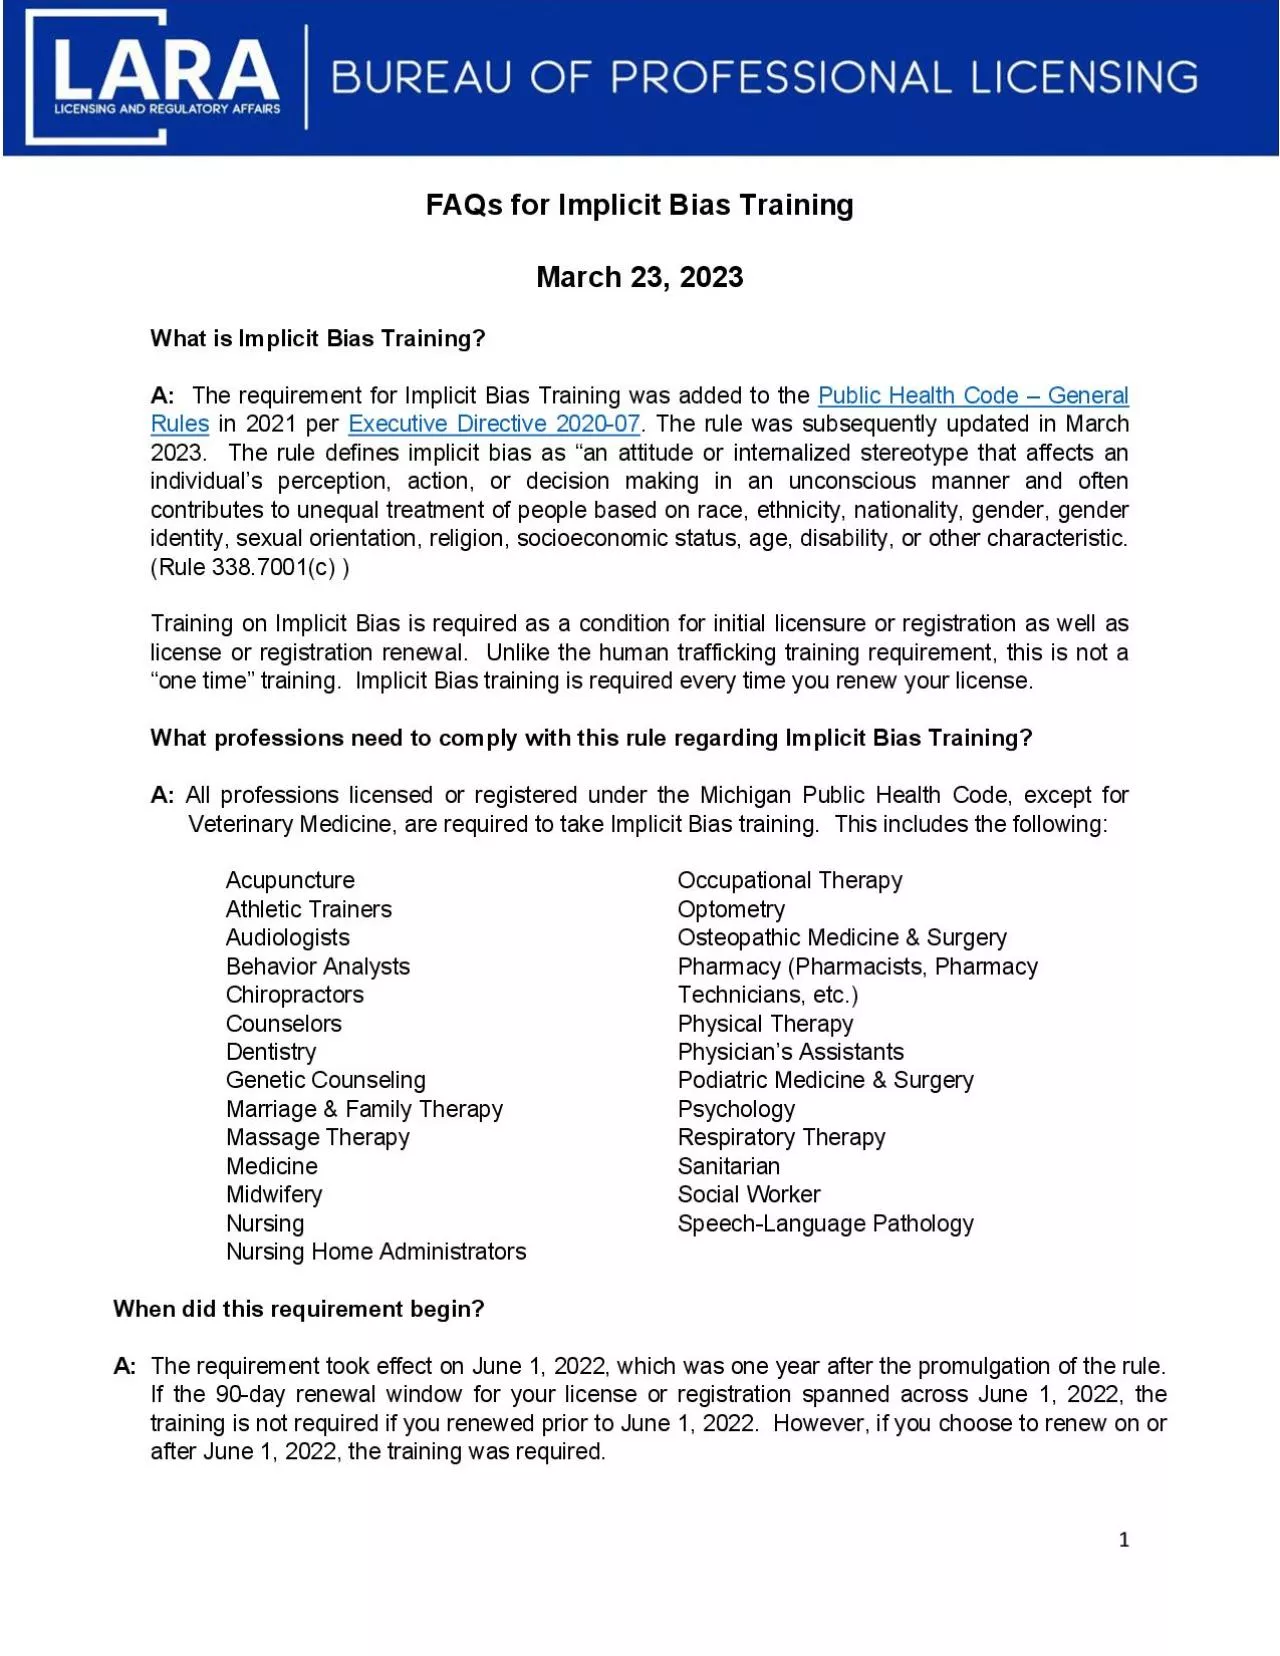 FAQs for Implicit Bias TrainingSeptember 242021What is Implicit Bias